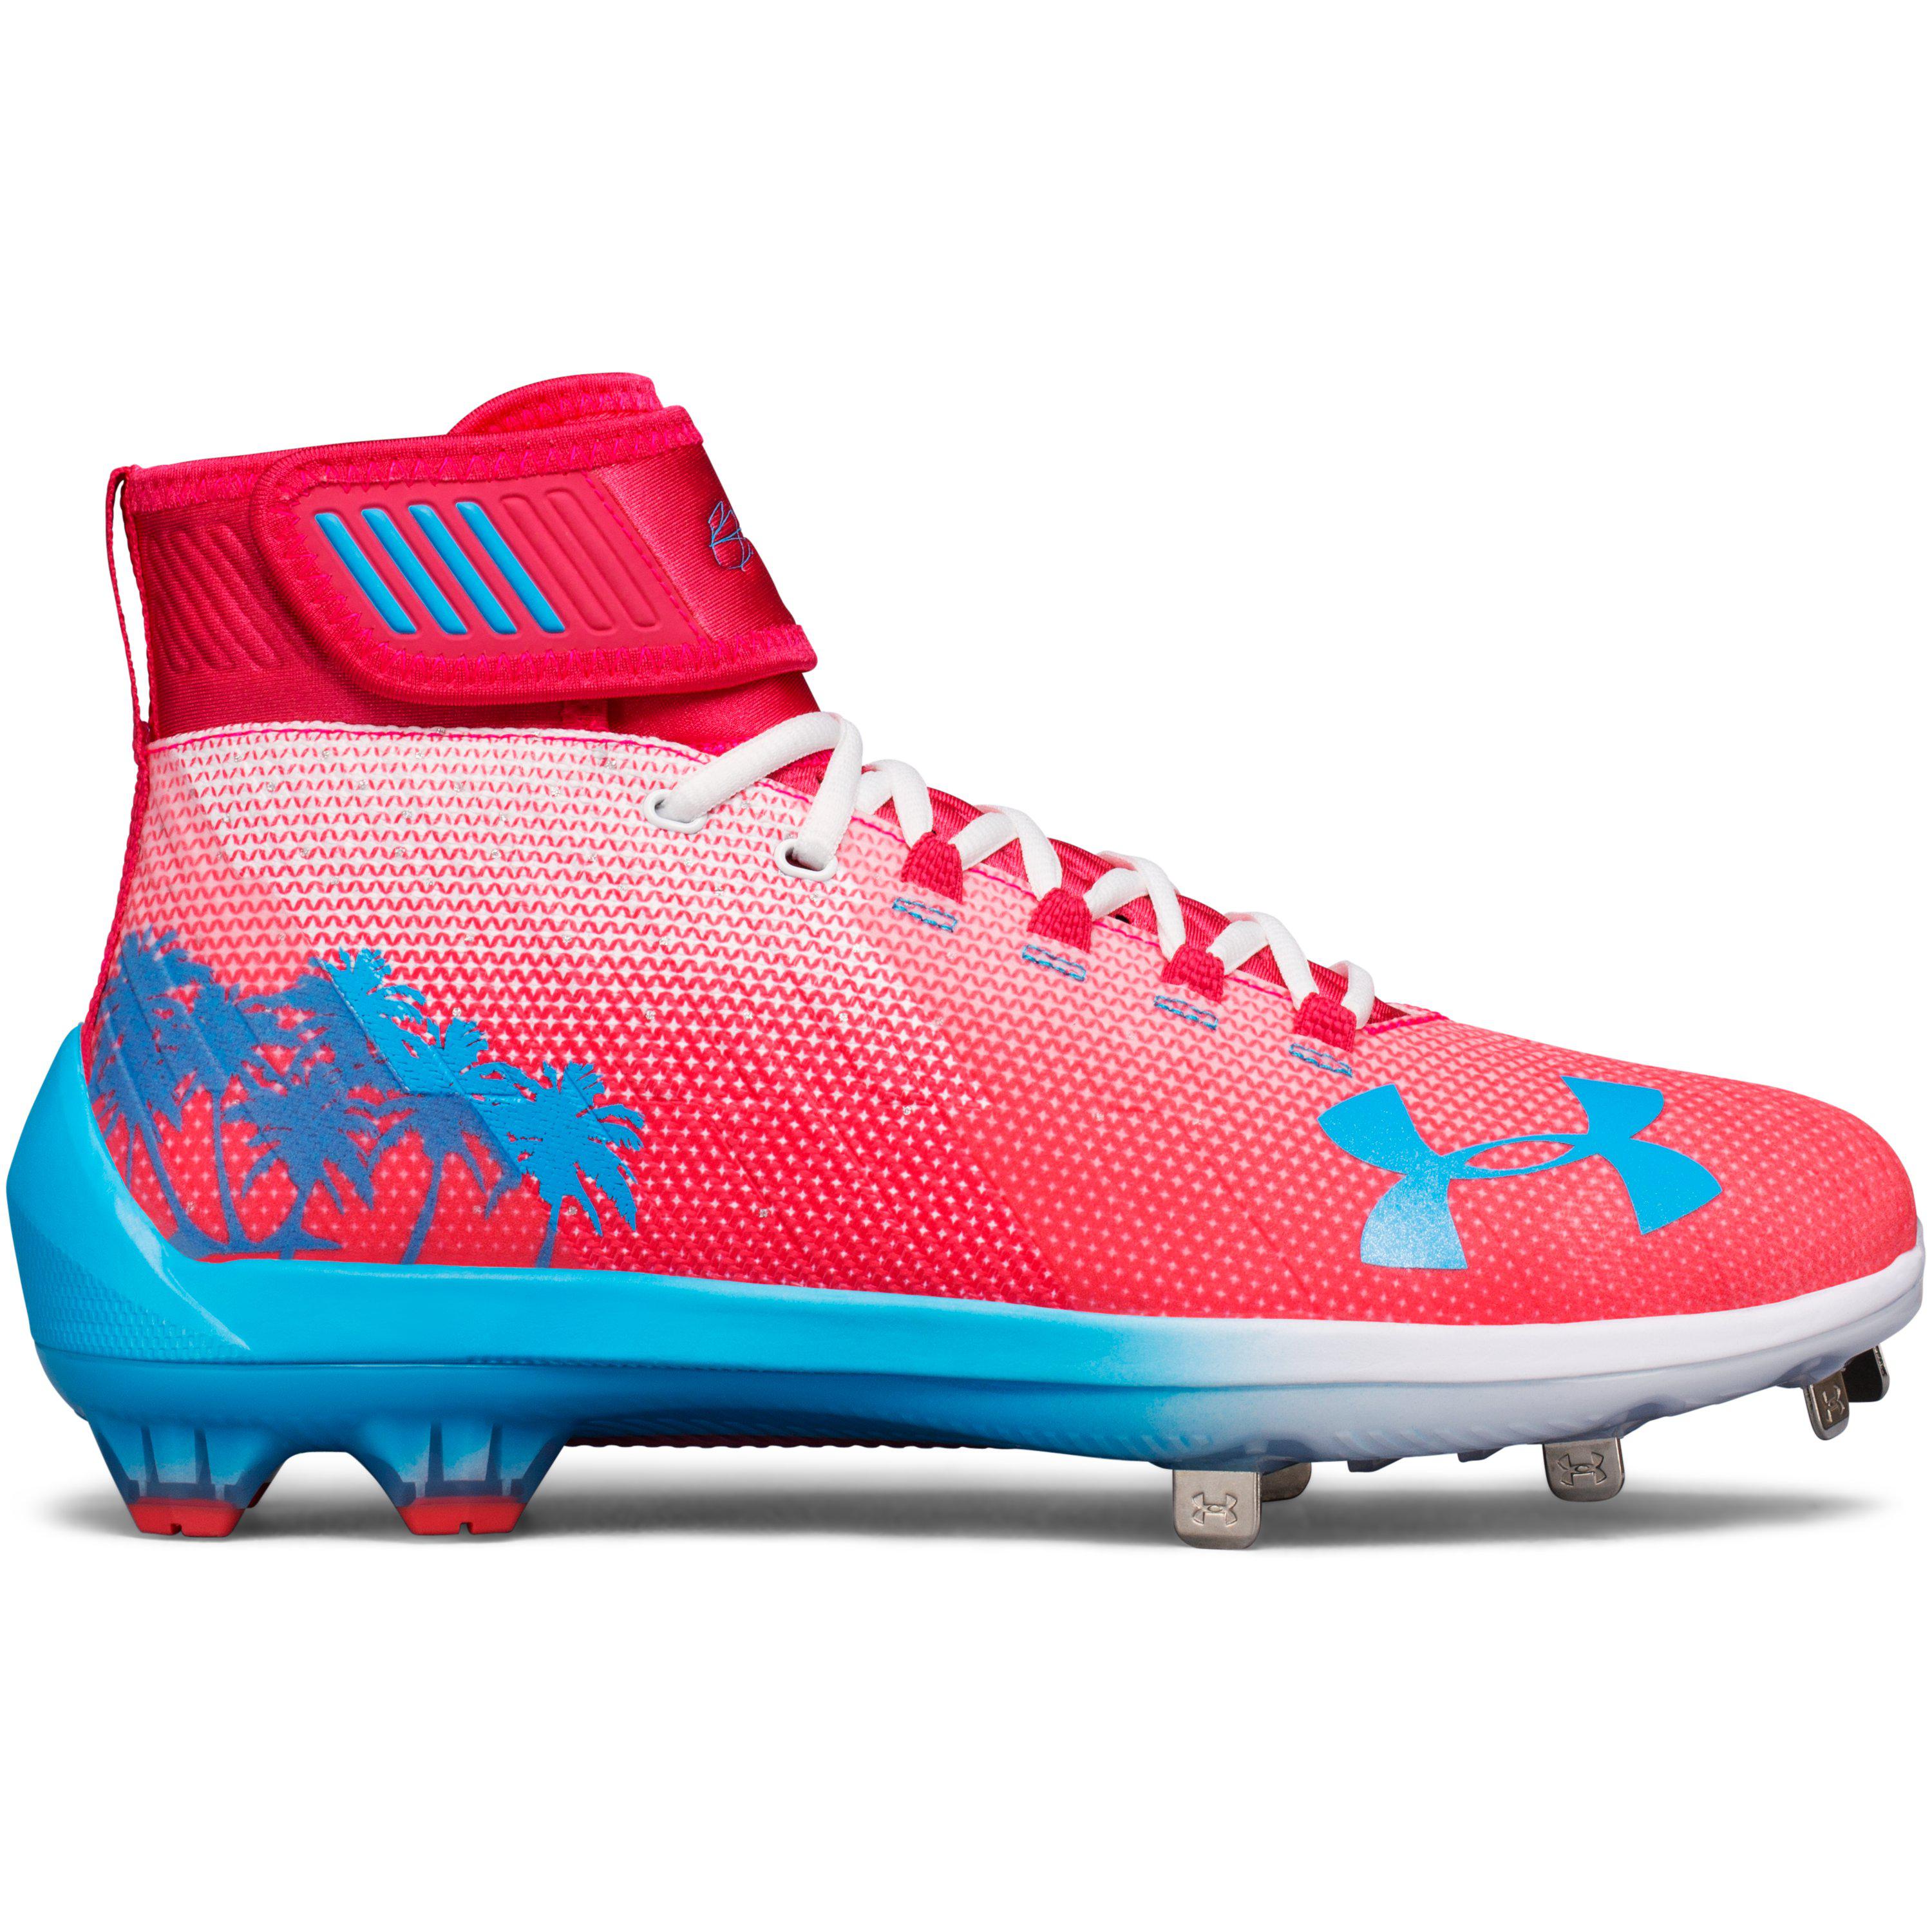 Sports Under Armour Mens Harper 2 Mid ST-Limited Edition Baseball Shoe ...